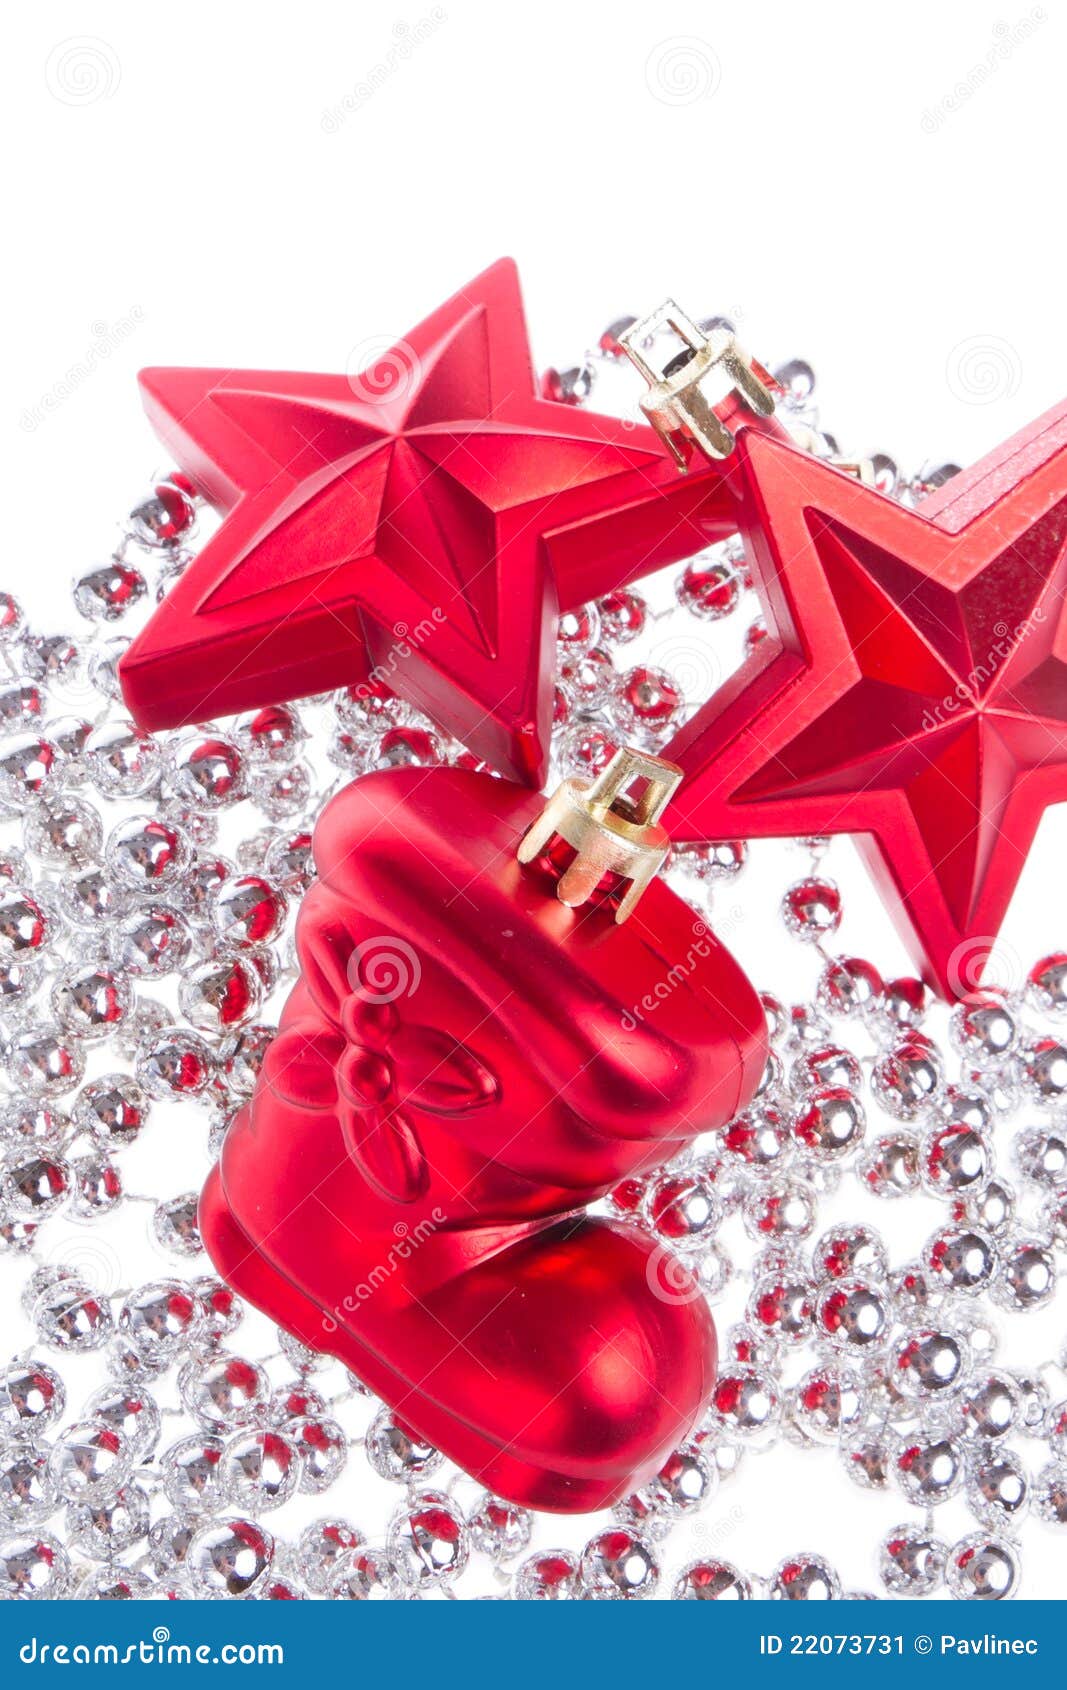 Christmas Decoration With Tinsel Stock Image  Image of shape